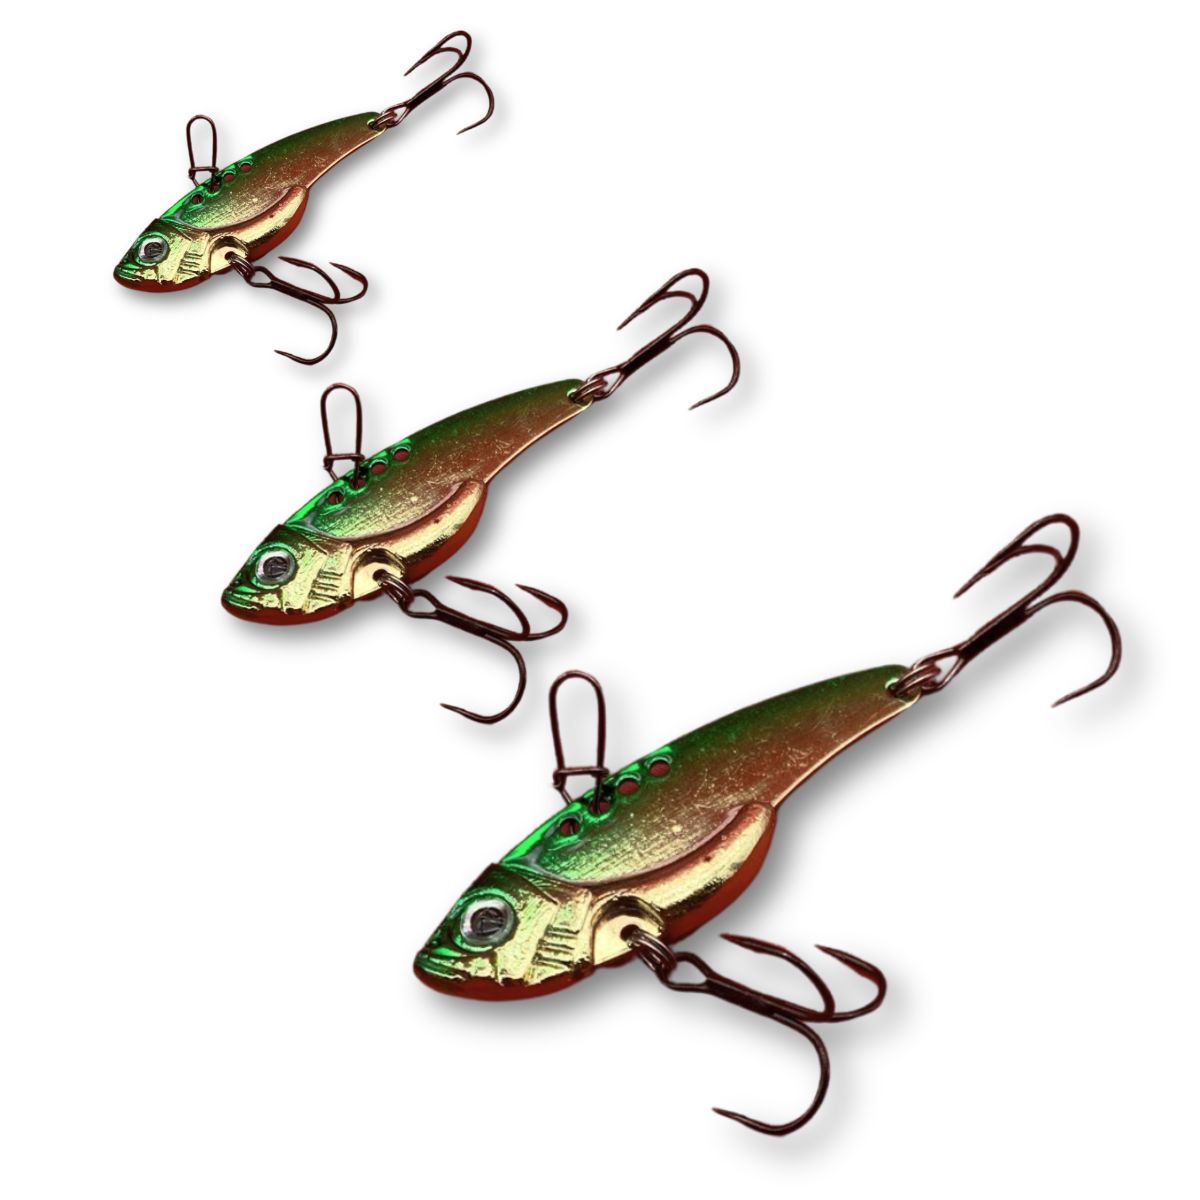 KAMIKAZE Metal Blades - Vibrating Lures 3 Pack (Aussie Green-Gold) - South East Clearance Centre